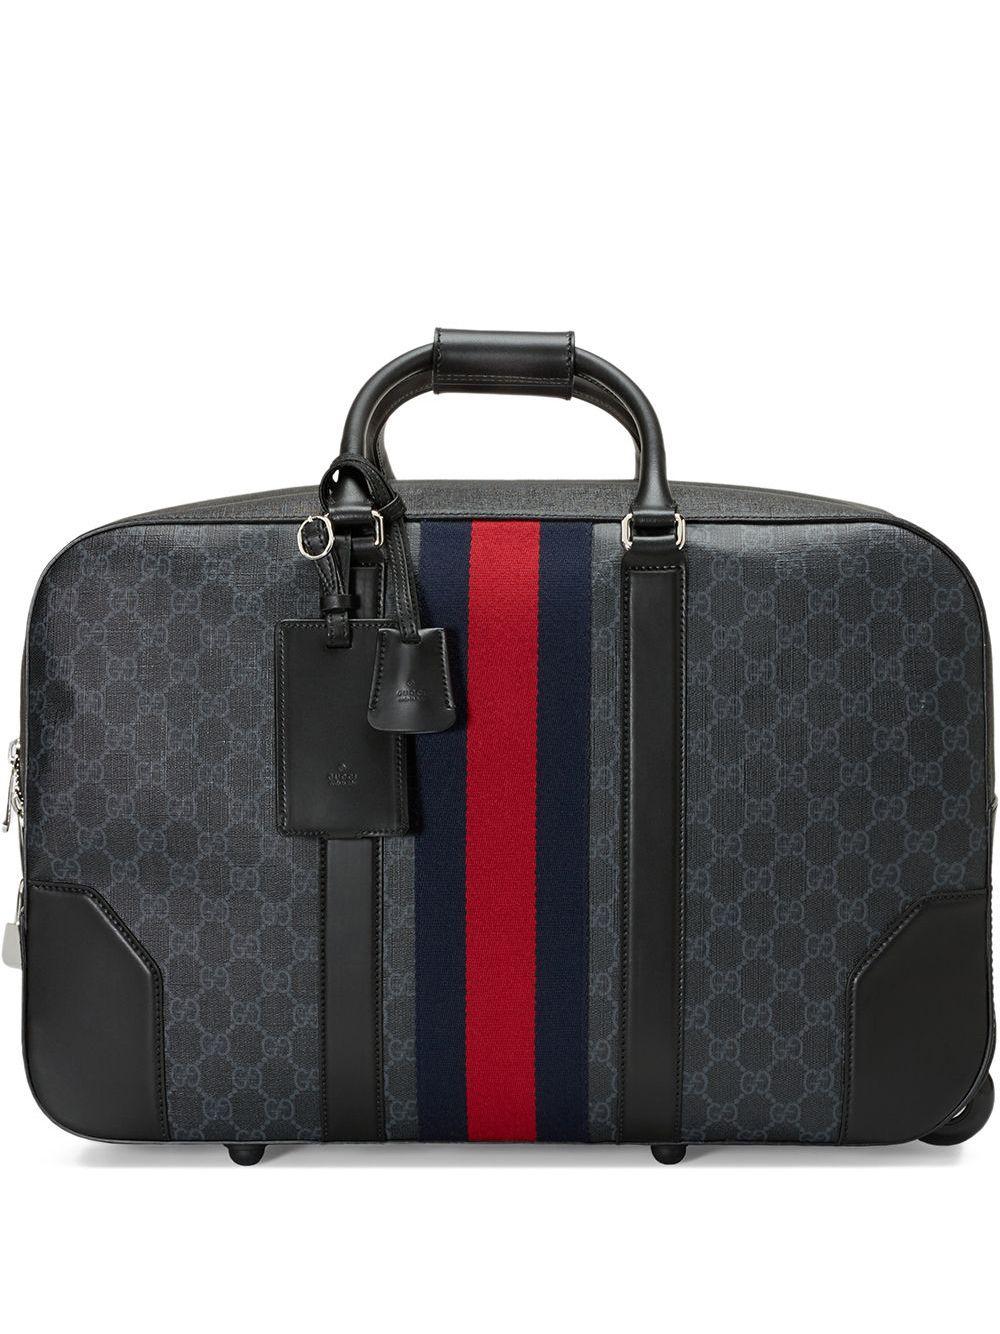 GG Supreme Ophidia Medium Carry-on Duffle